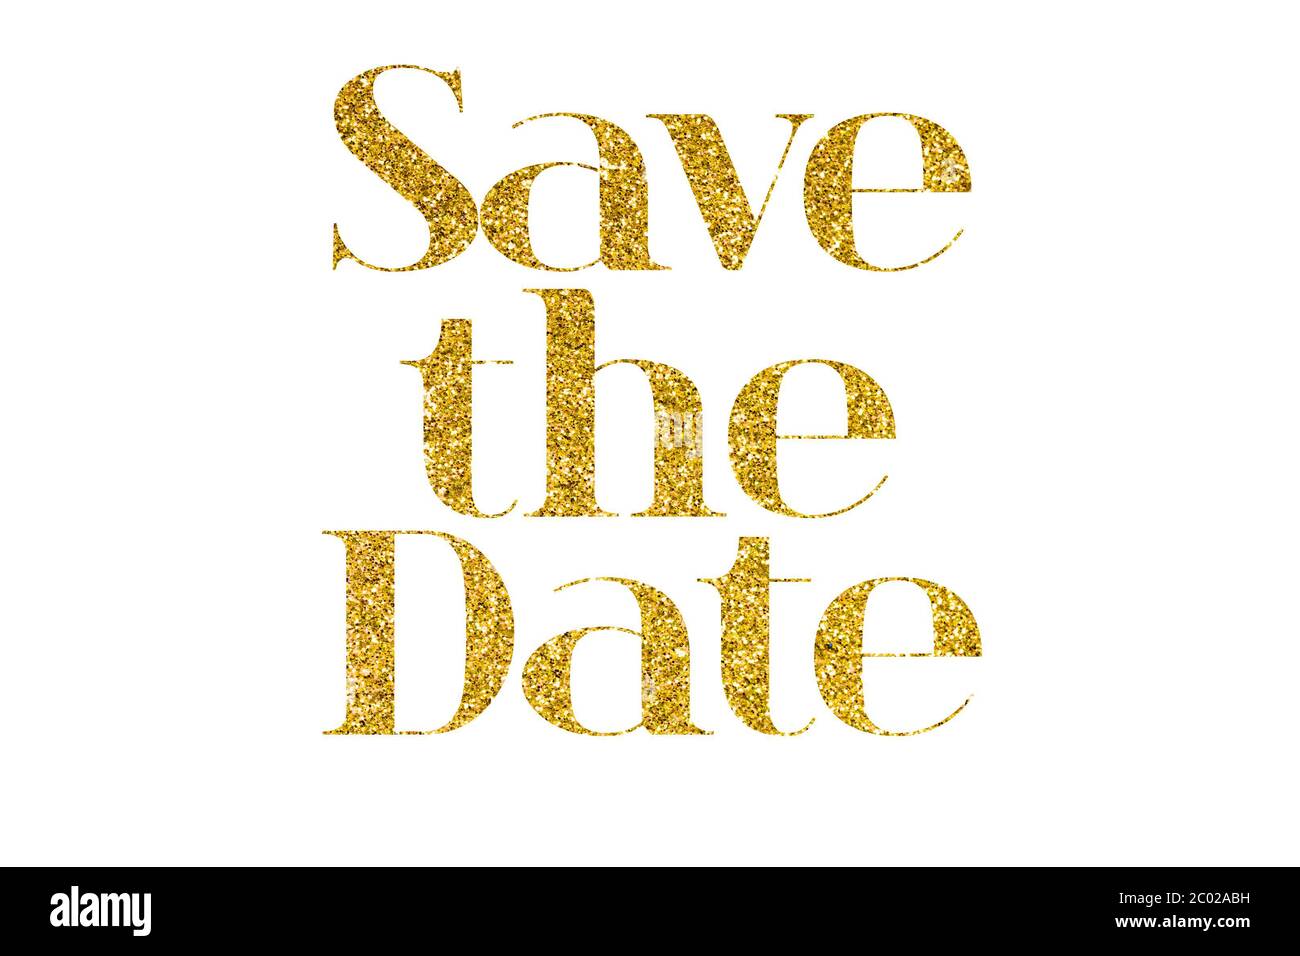 Save The Date Wedding Party Event Phrase In Sparkling Golden Glitter Text Stock Photo Alamy